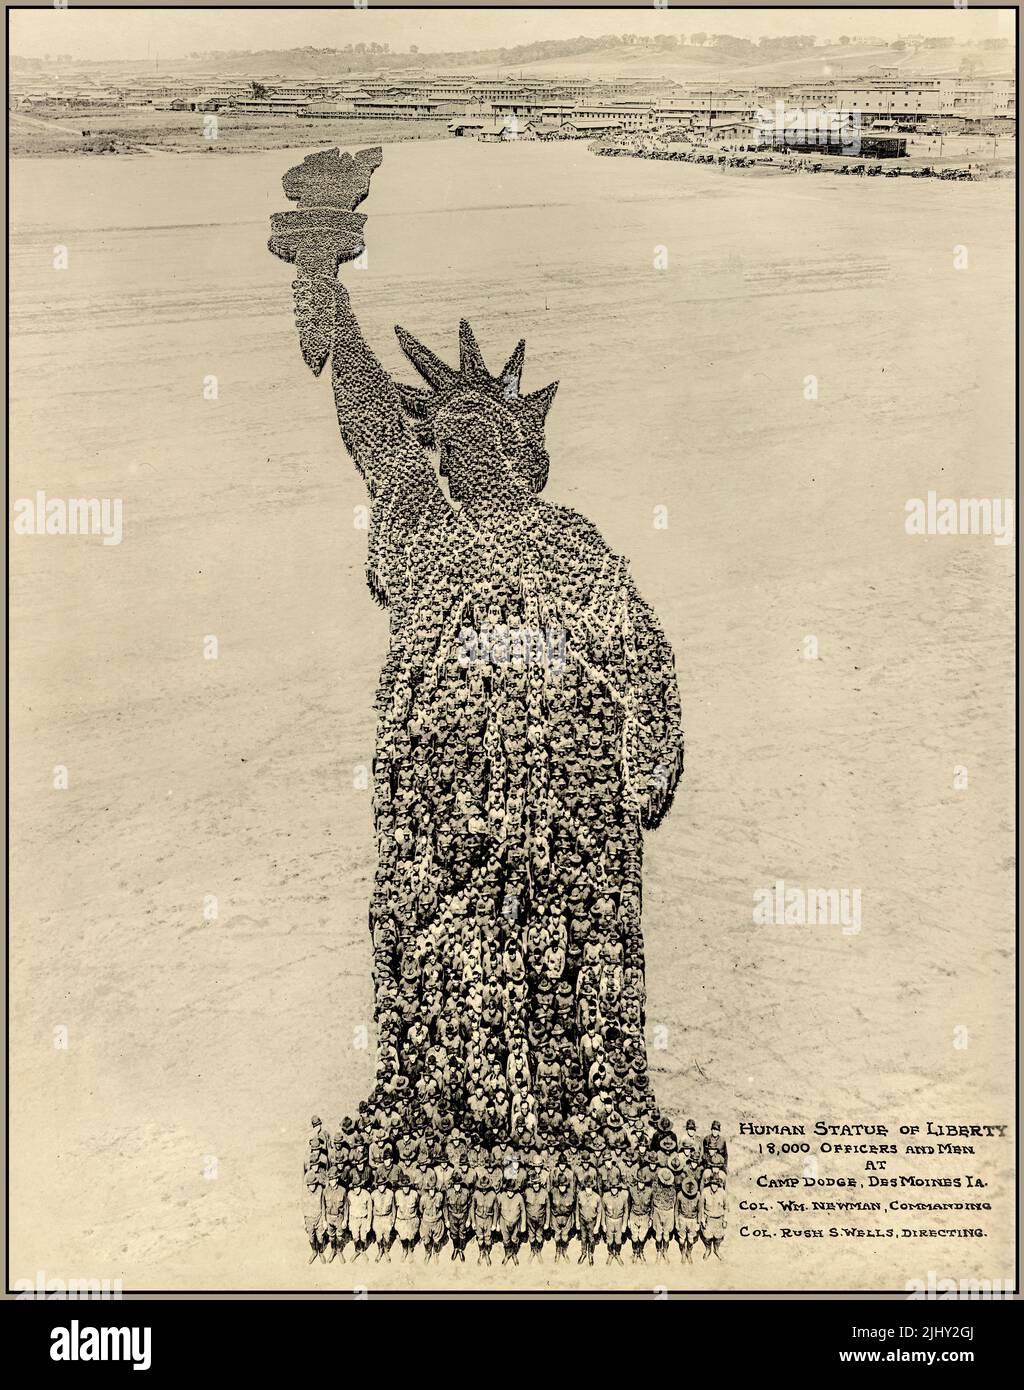 WW1 USA remarkable propaganda image of Human Statue of Liberty; 18,000 officers and men at Camp Dodge, Des Moines, Ia.; Col. Wm. Newman, commanding; Col. Rush S. Wells, directing Date 1918 World War 1 First World War The Great War Stock Photo